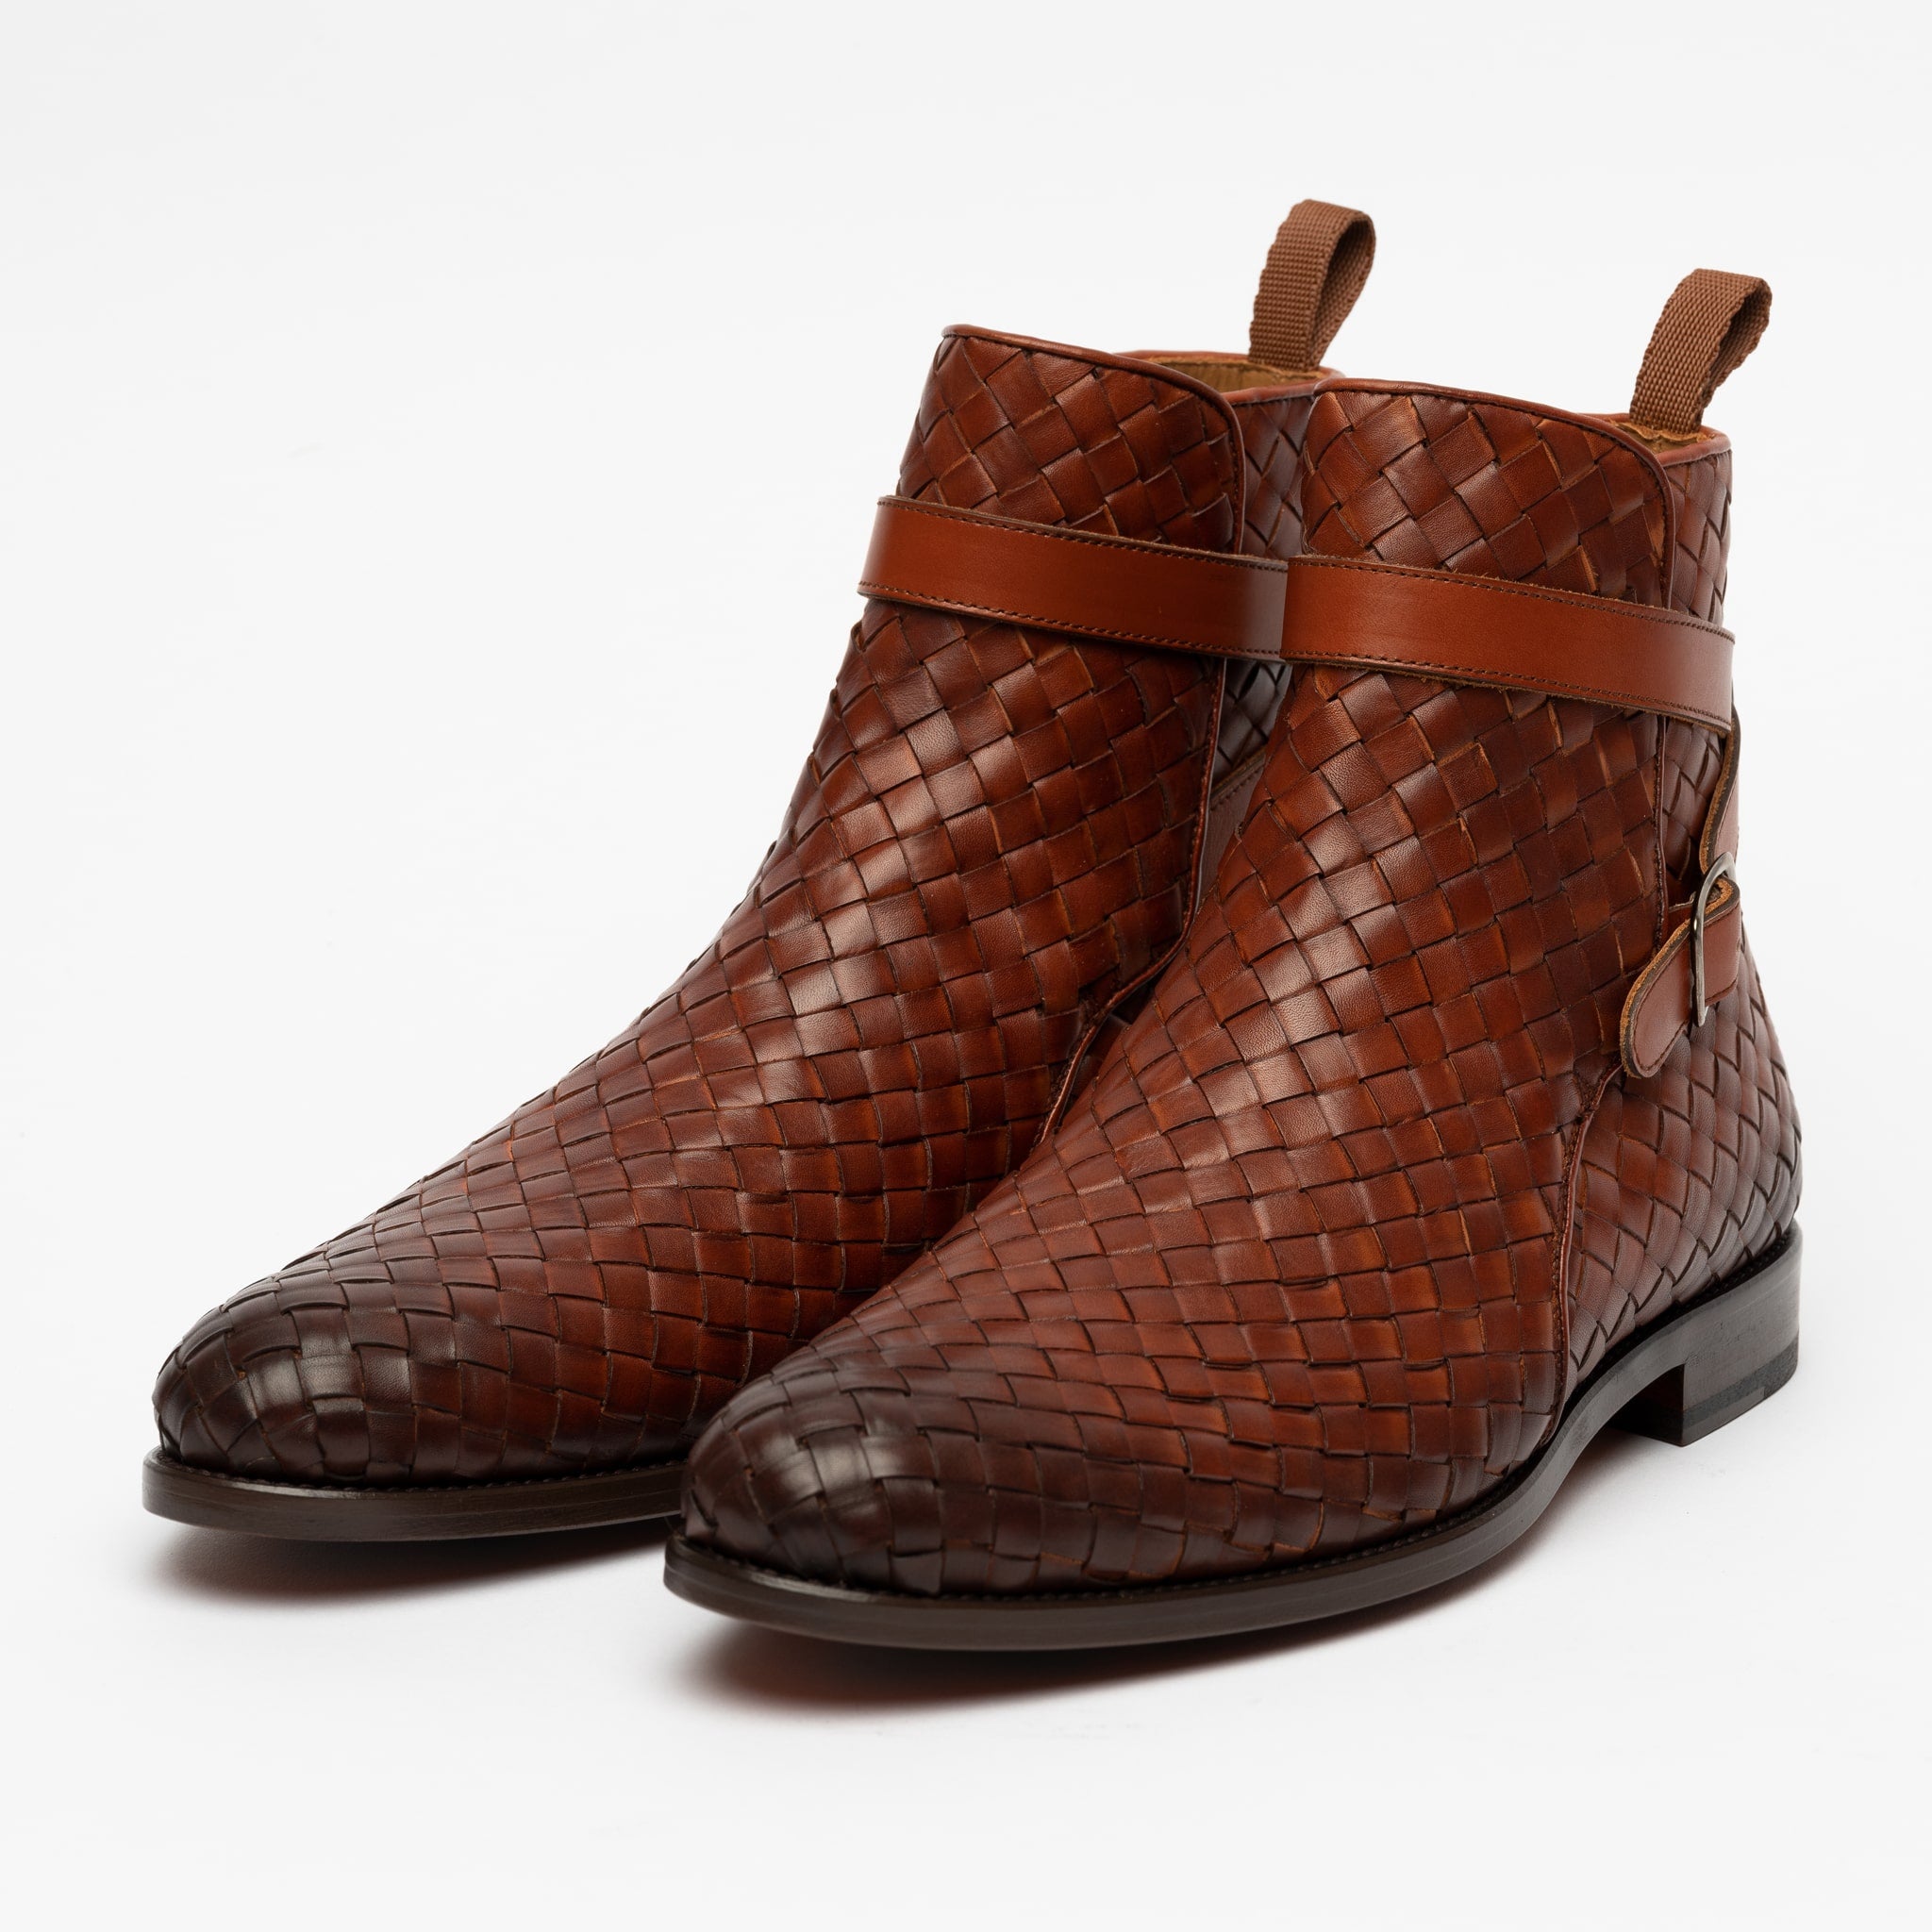 The Dylan Boot - Woven Leather Boot | TAFT